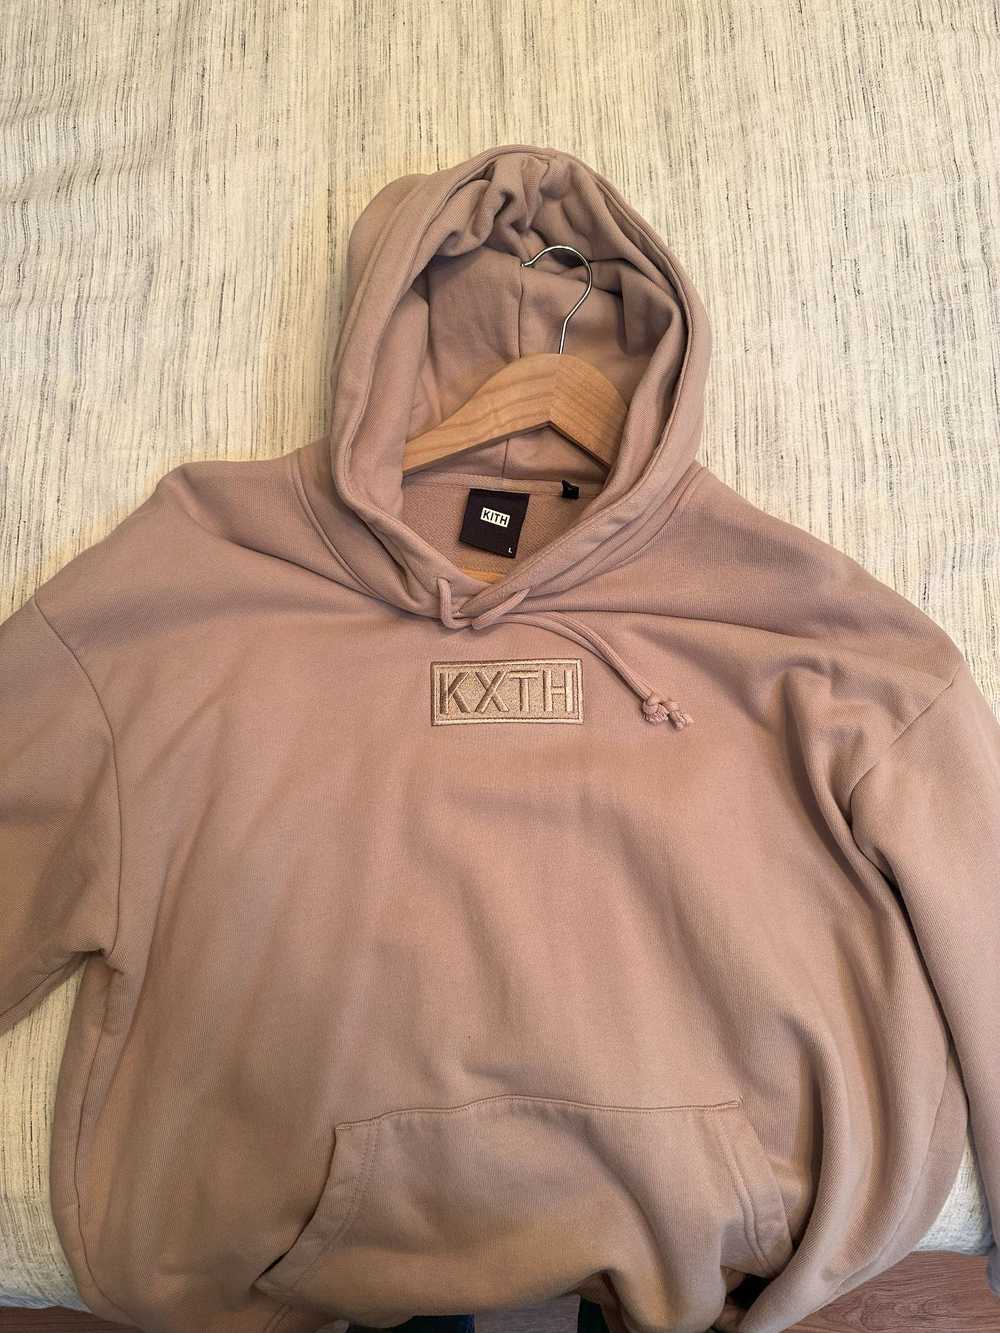 Kith Kith - Kxth - Cyber Monday Dust Rose Hoodie - image 1